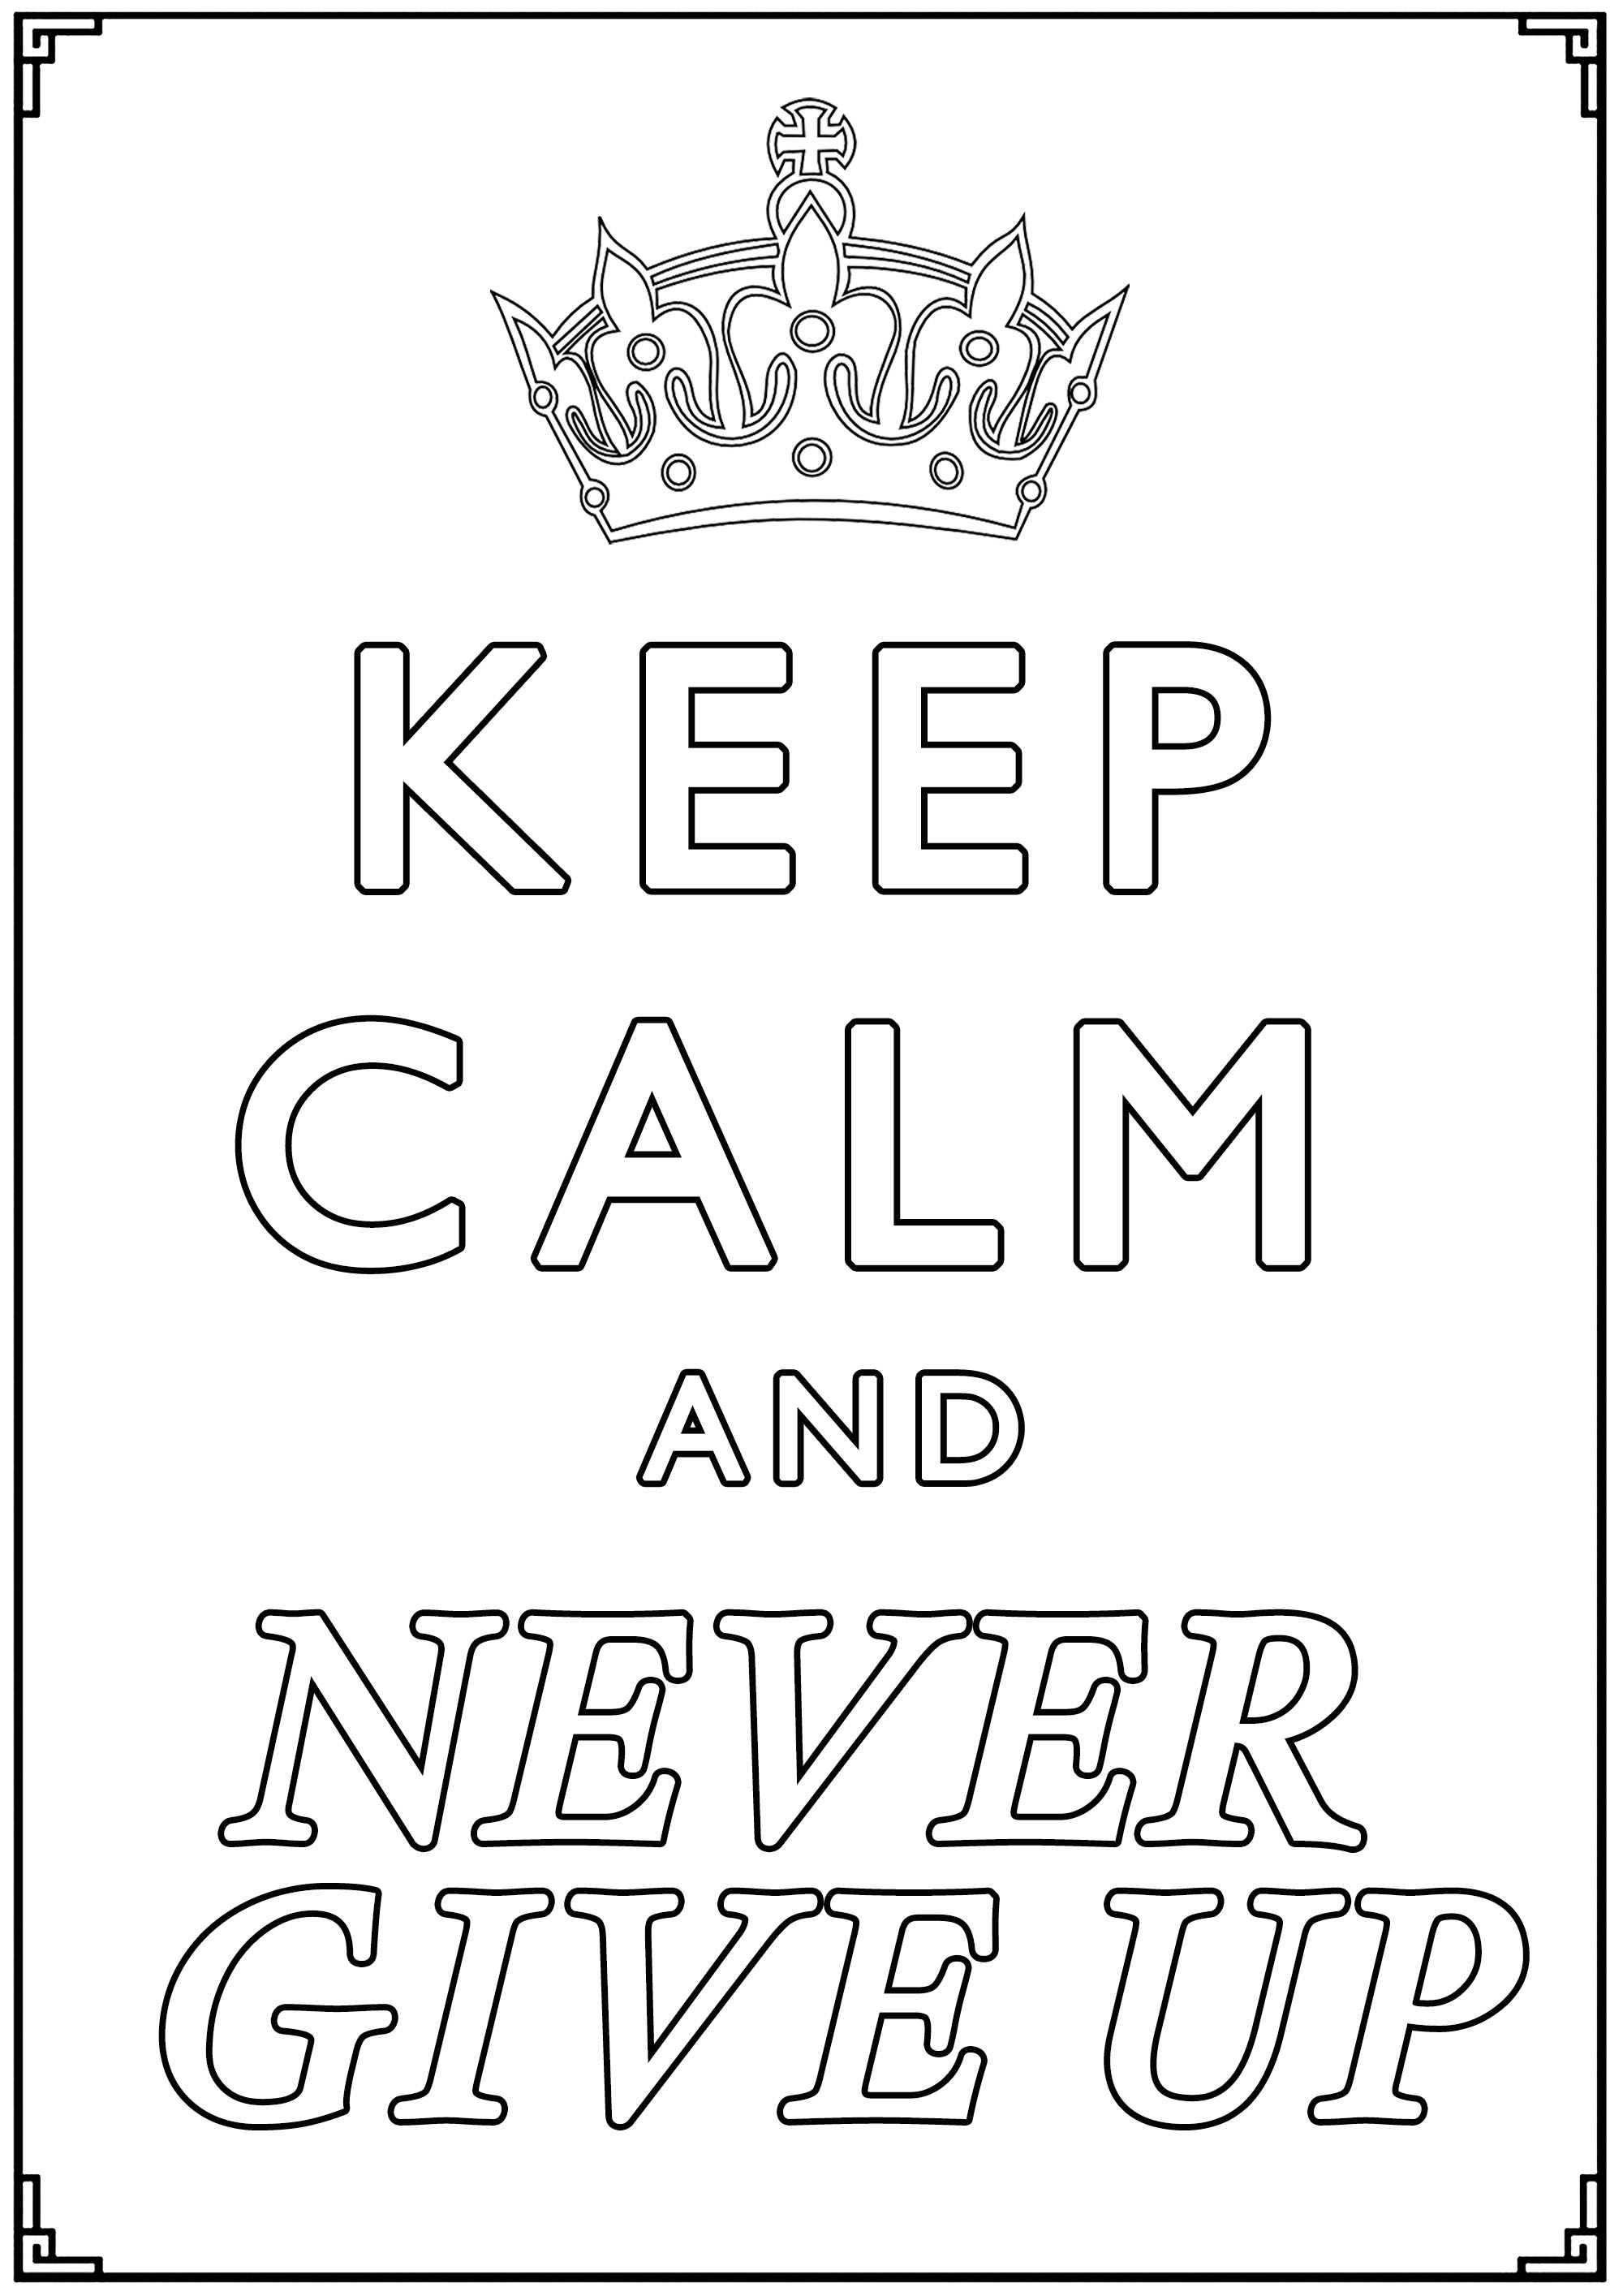 Keep calm and never give up